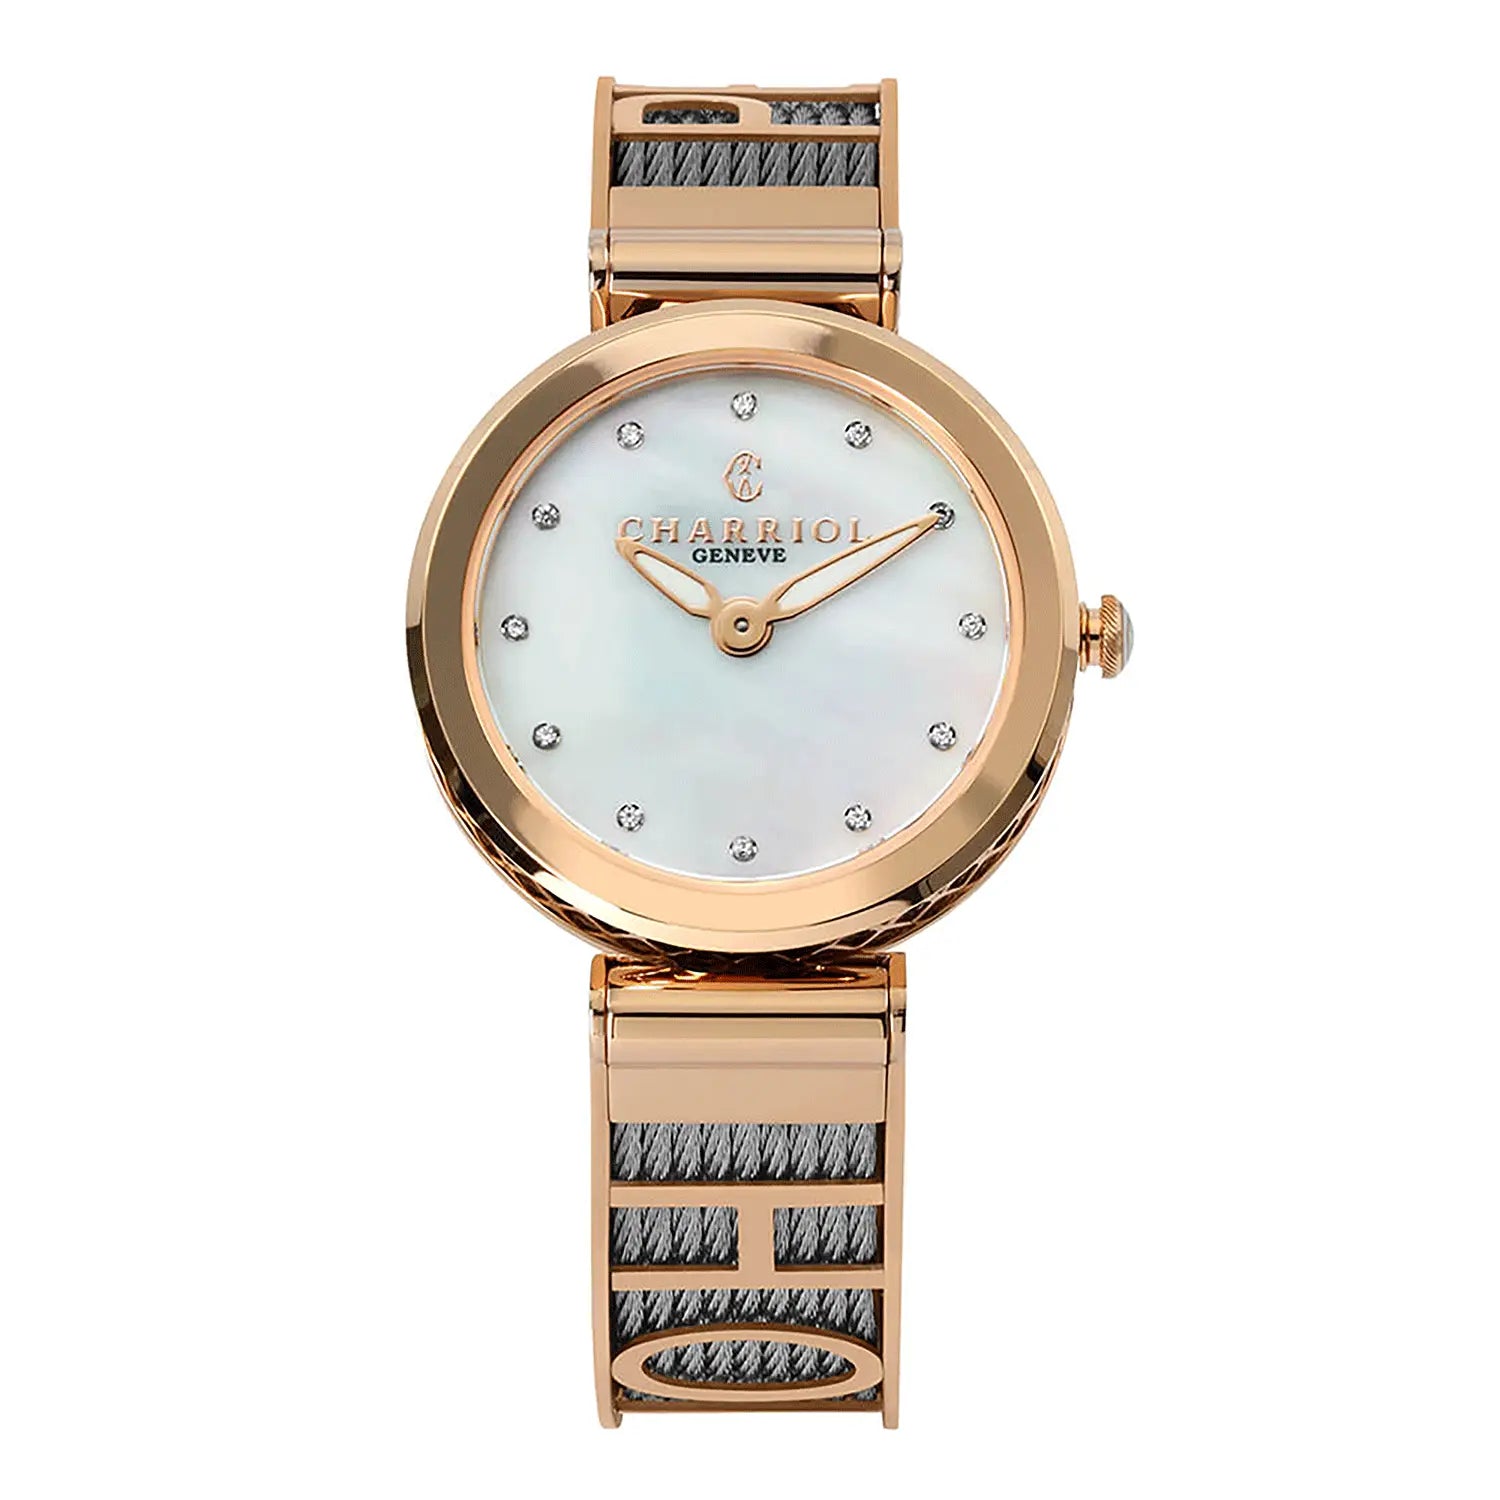 FOREVER YOURS, 32MM, QUARTZ CALIBRE, MOTHER-OF-PEARL WITH 12 DIAMONDS DIAL, ROSE GOLD PVD BEZEL, STEEL CABLE BRACELET - Charriol Geneve -  Watch